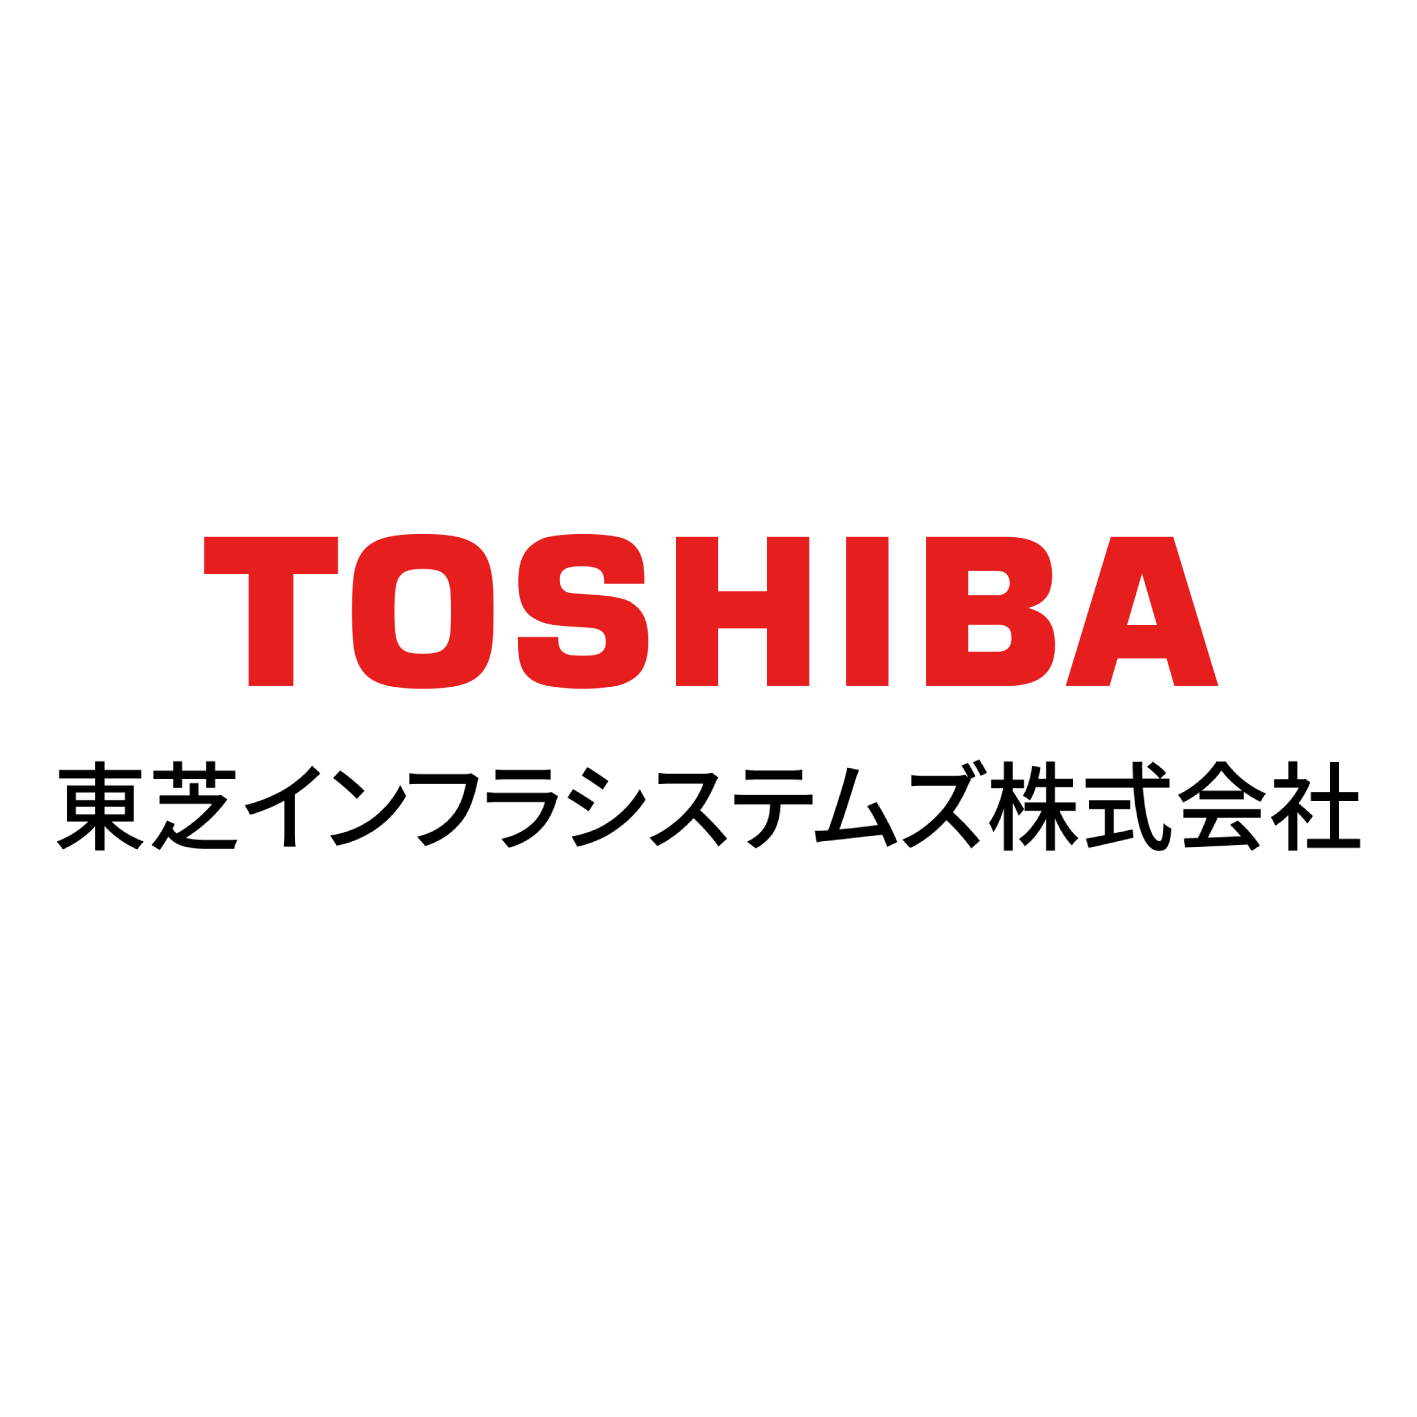 Toshiba Infrastracture Systems &Solutions Corporation